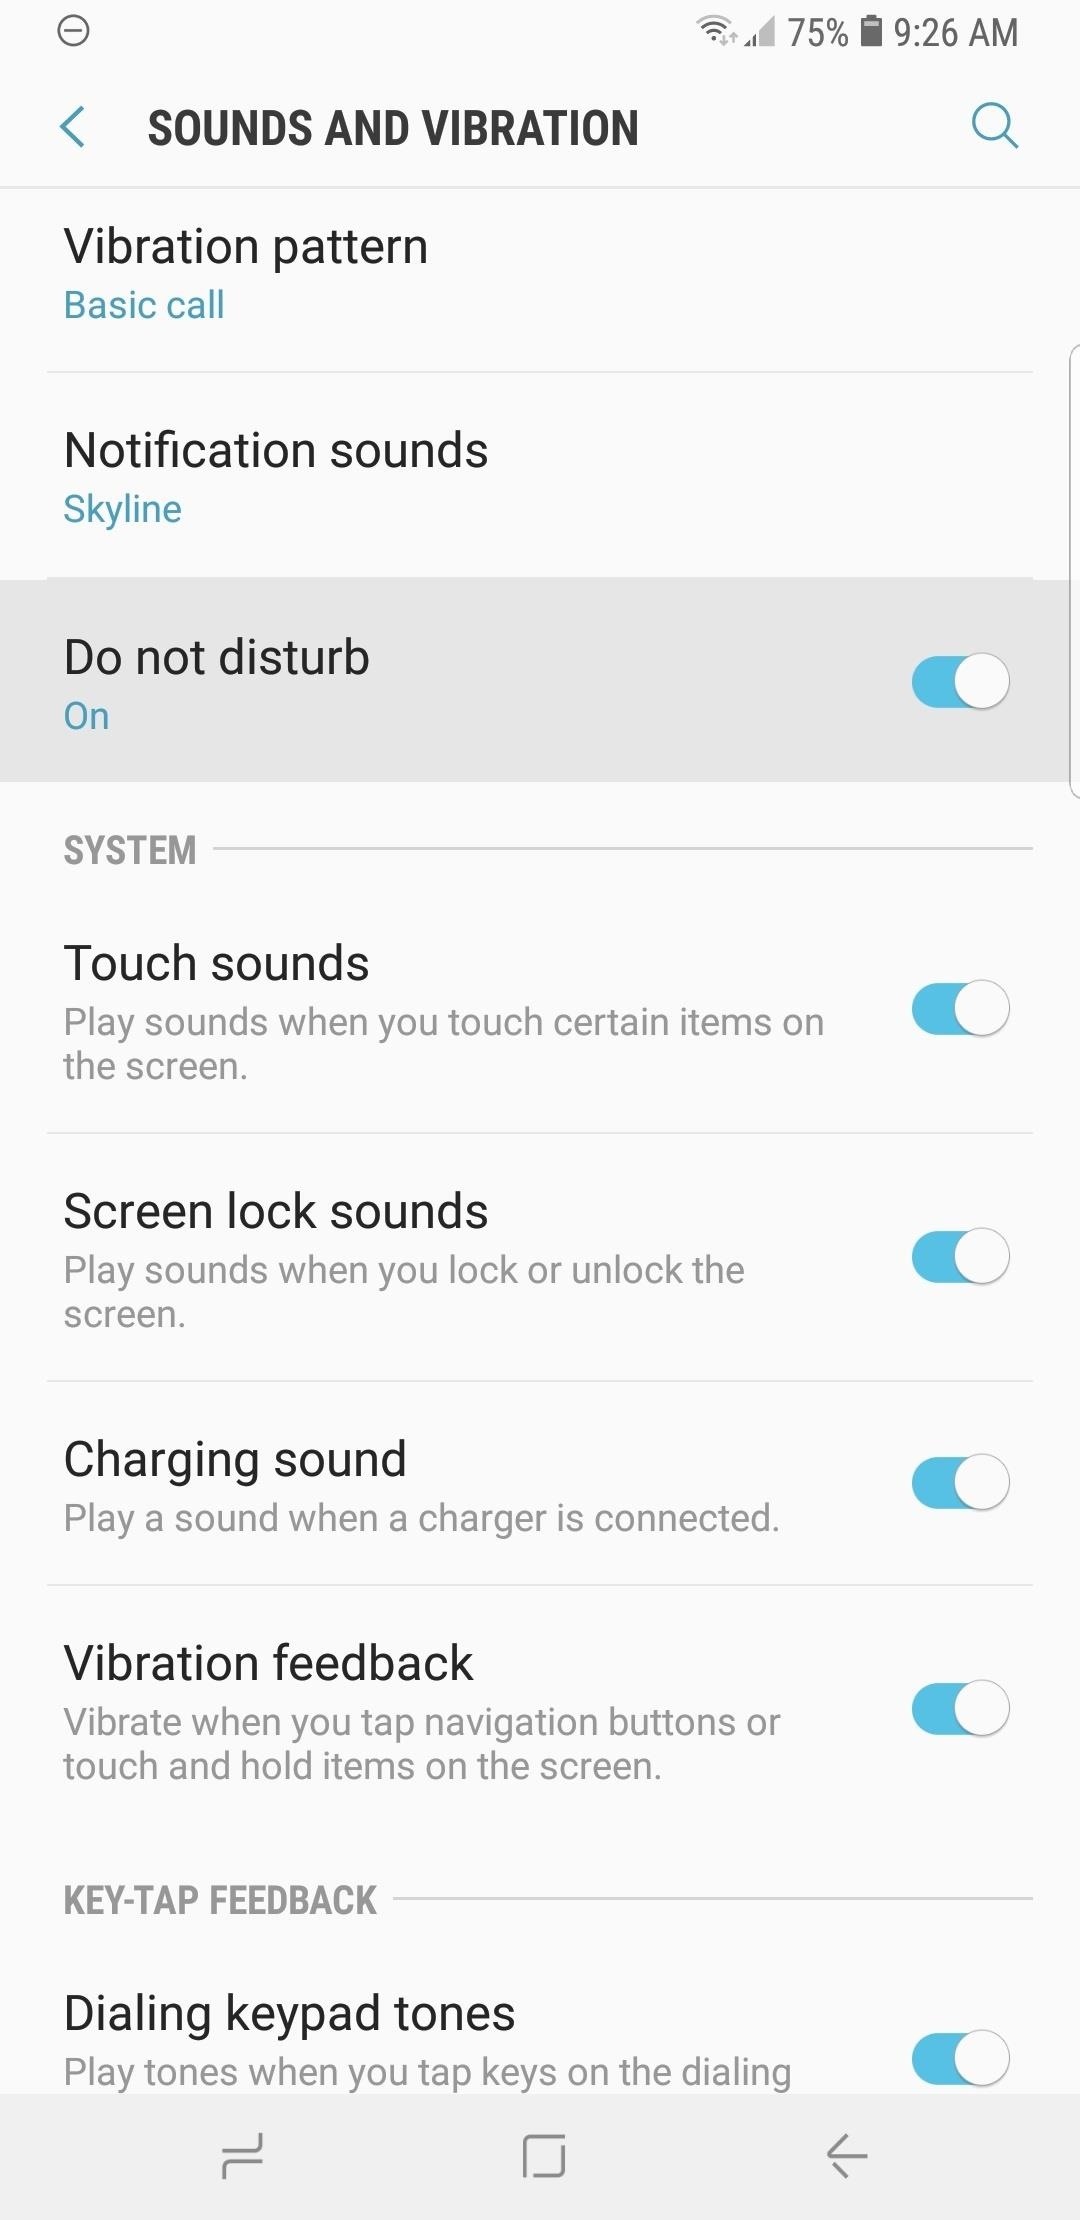 Here's What's New in the Settings Menu on Samsung's One UI